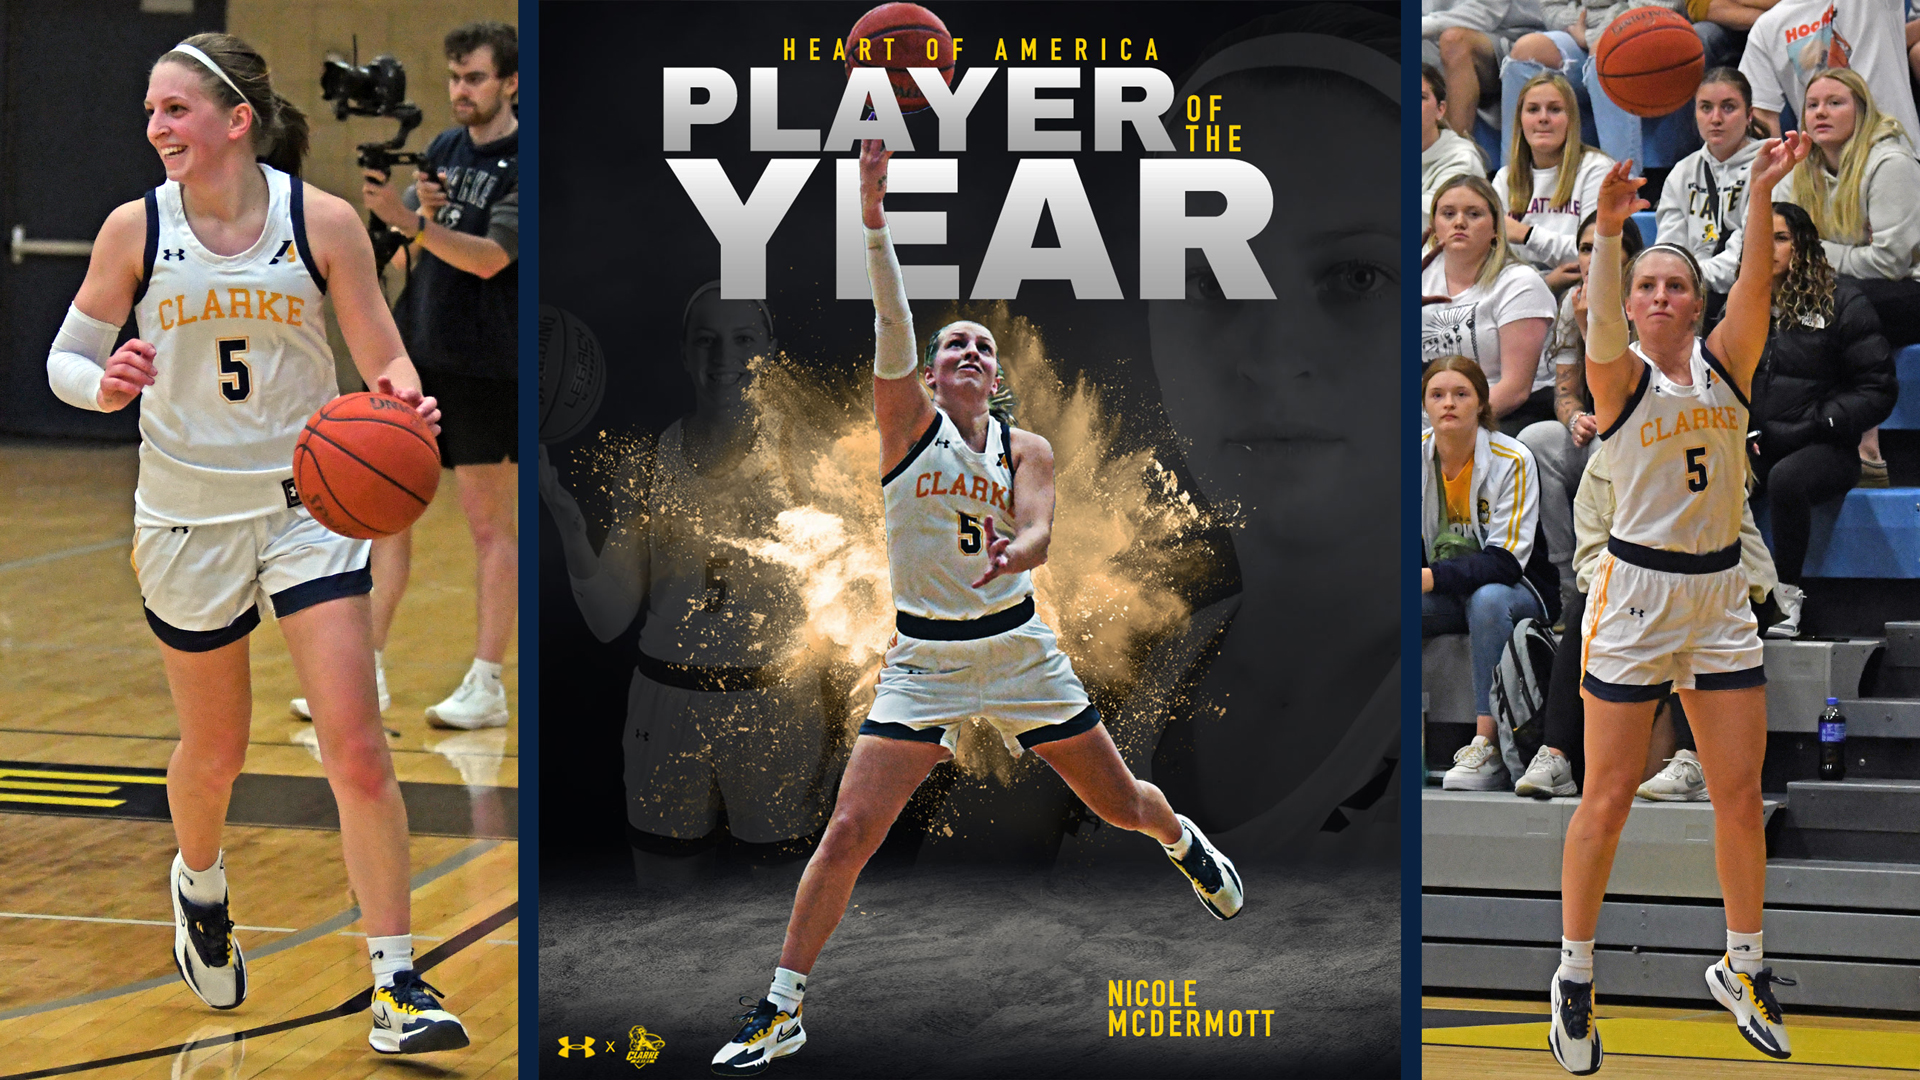 Nicole McDermott claims first Heart Player of the Year in program history